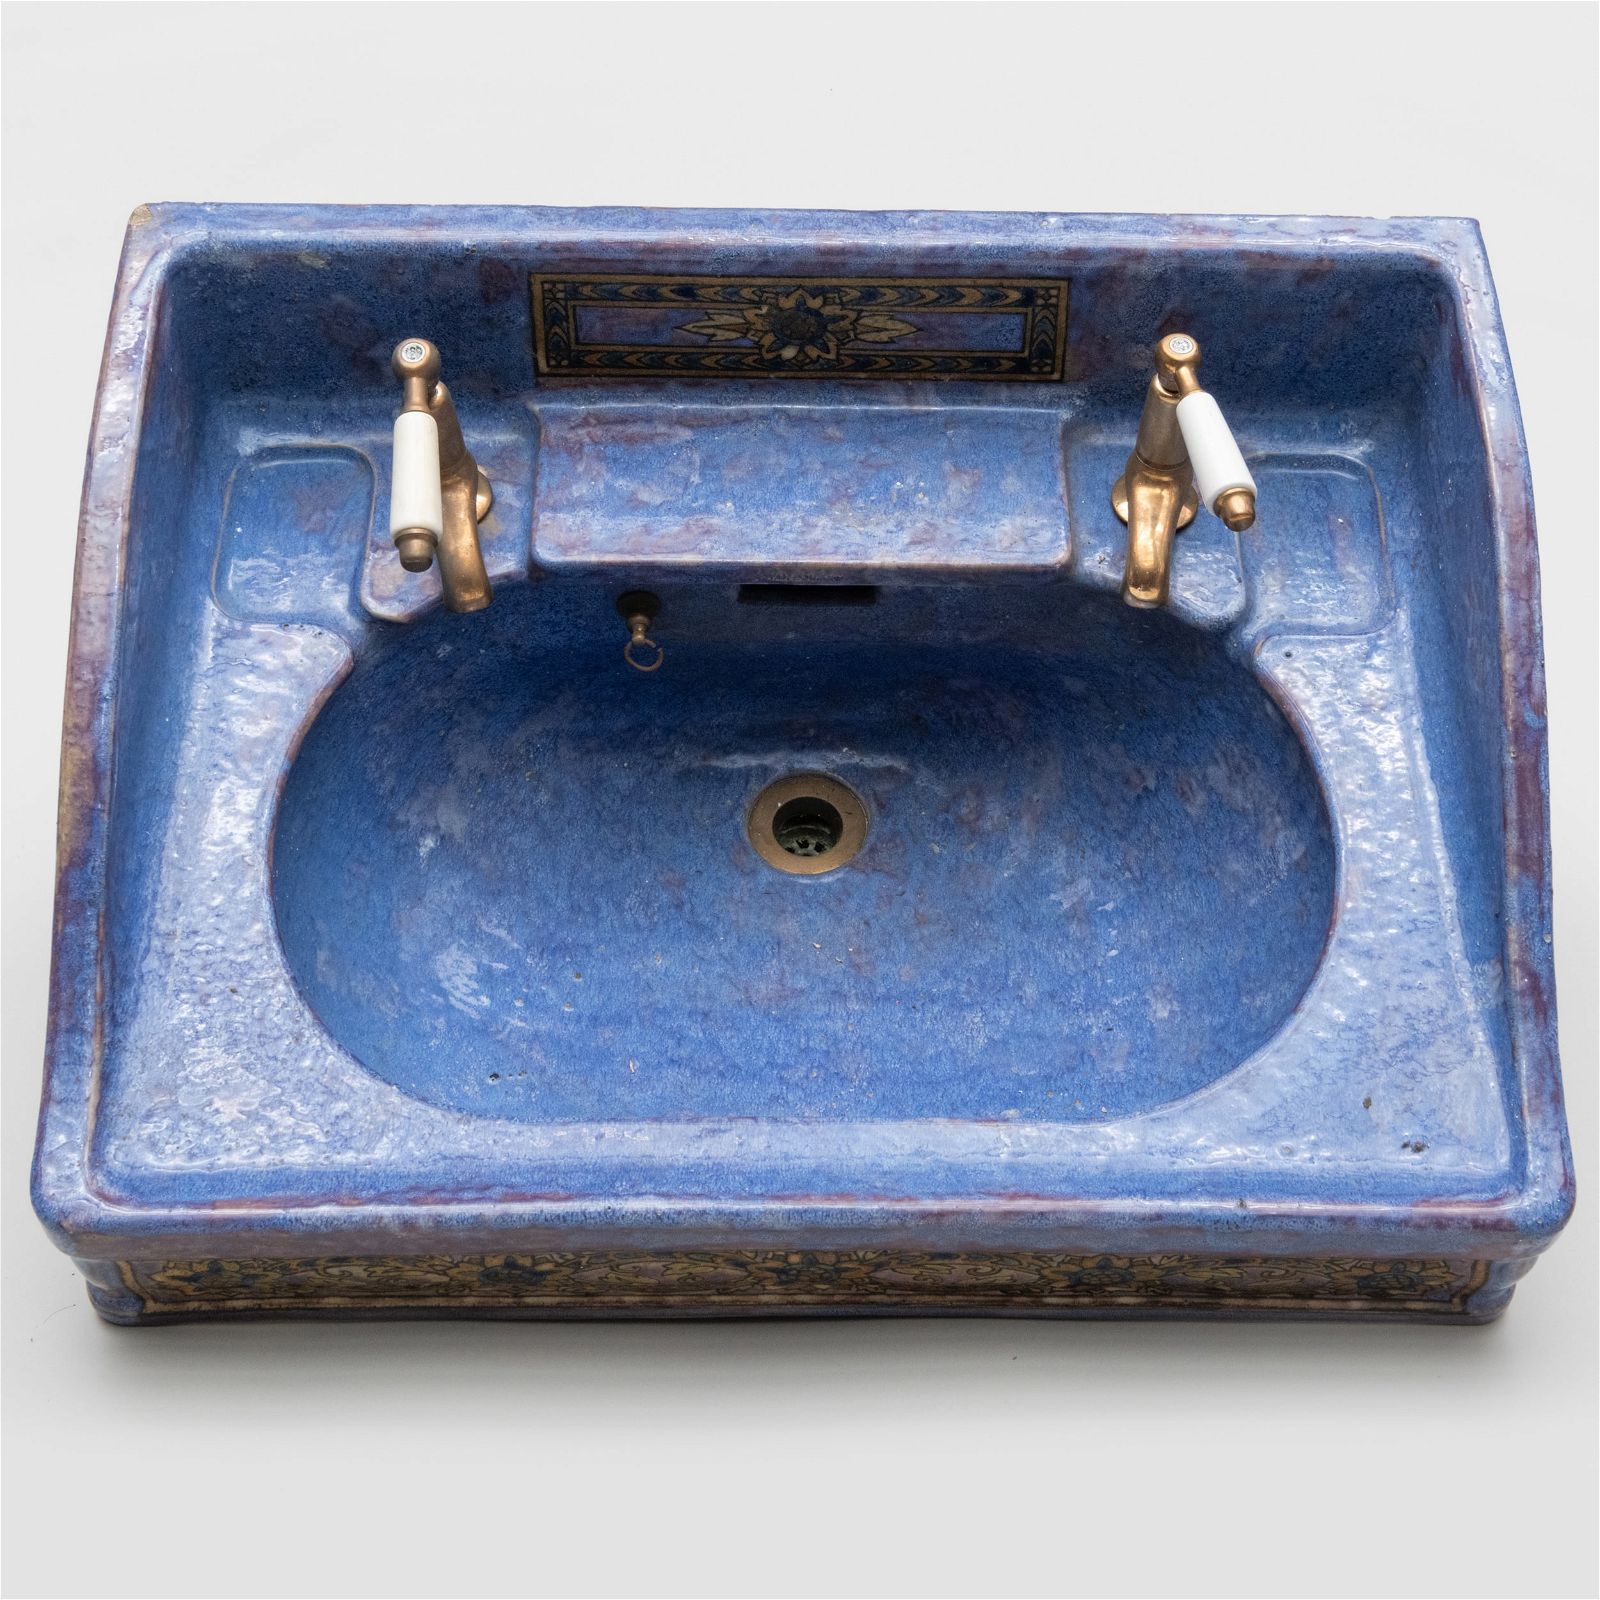 Doulton & Co stoneware sink, shelf, and soap dishes, which sold for $33,280 at Stair Galleries.